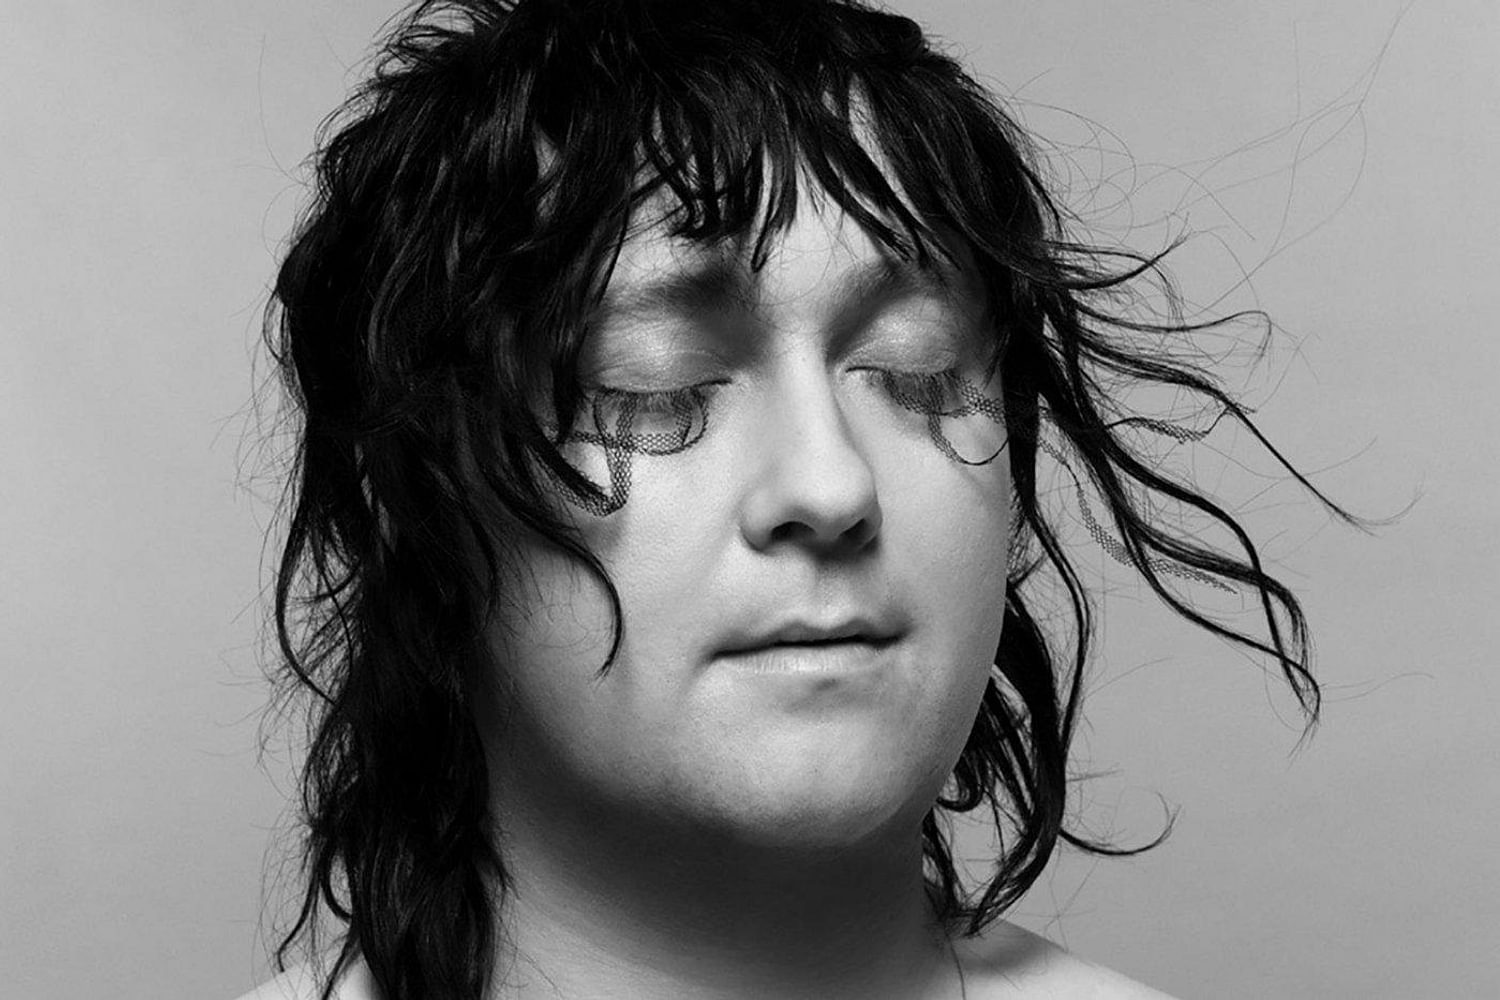 Anohni announces new ‘Paradise EP’, shares title track